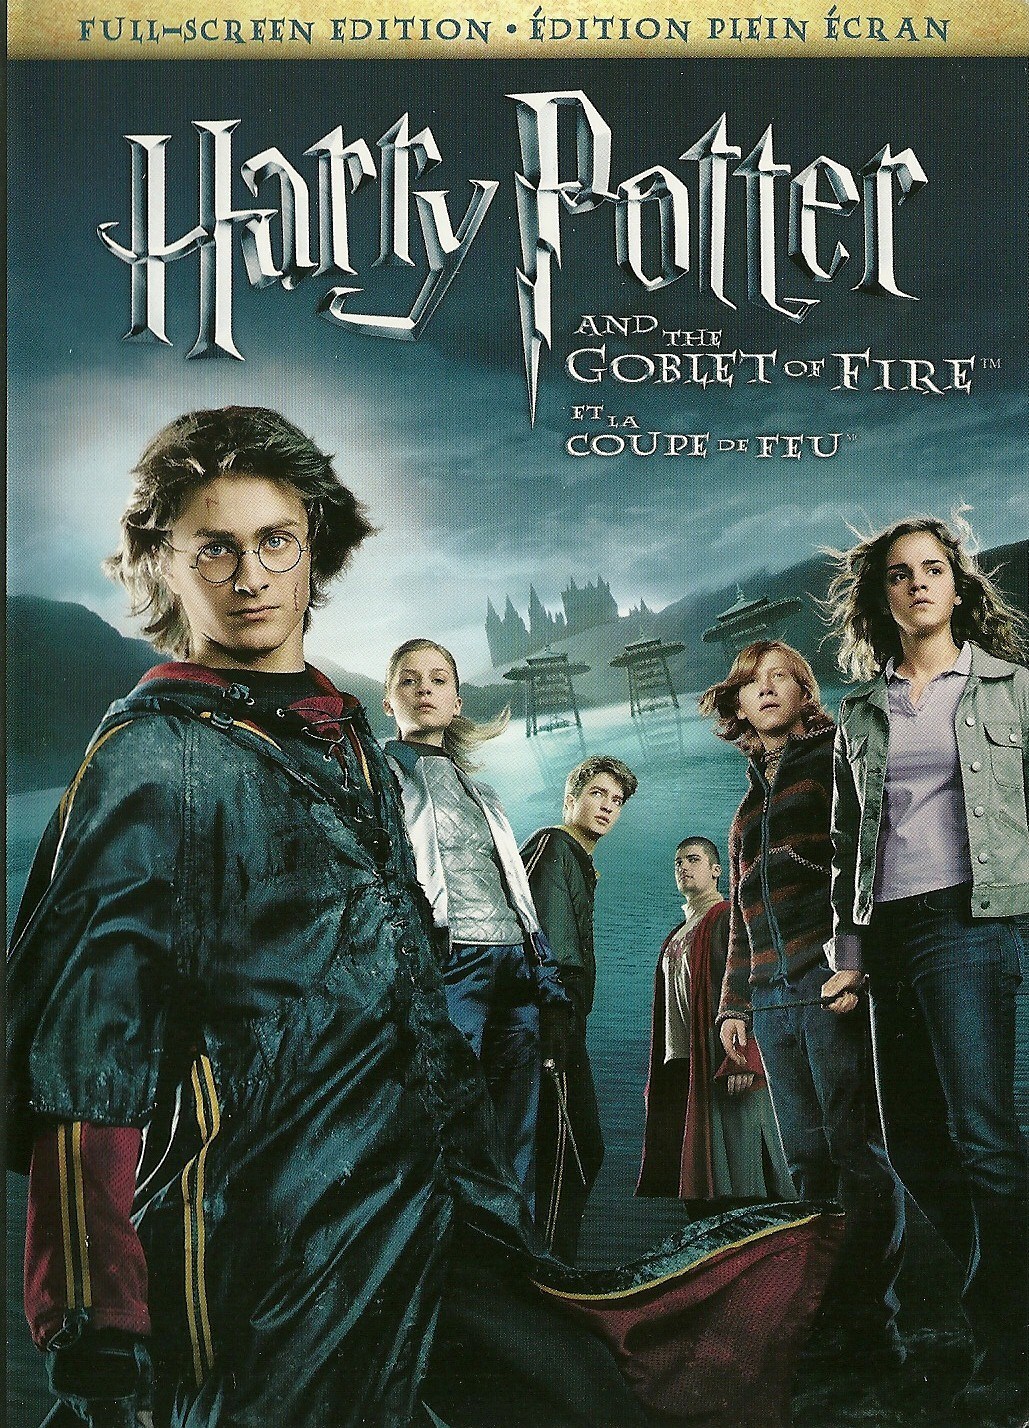 Harry Potter And The Goblet Of Fire DVD Daniel Radcliffe Emma Watson - $2.99